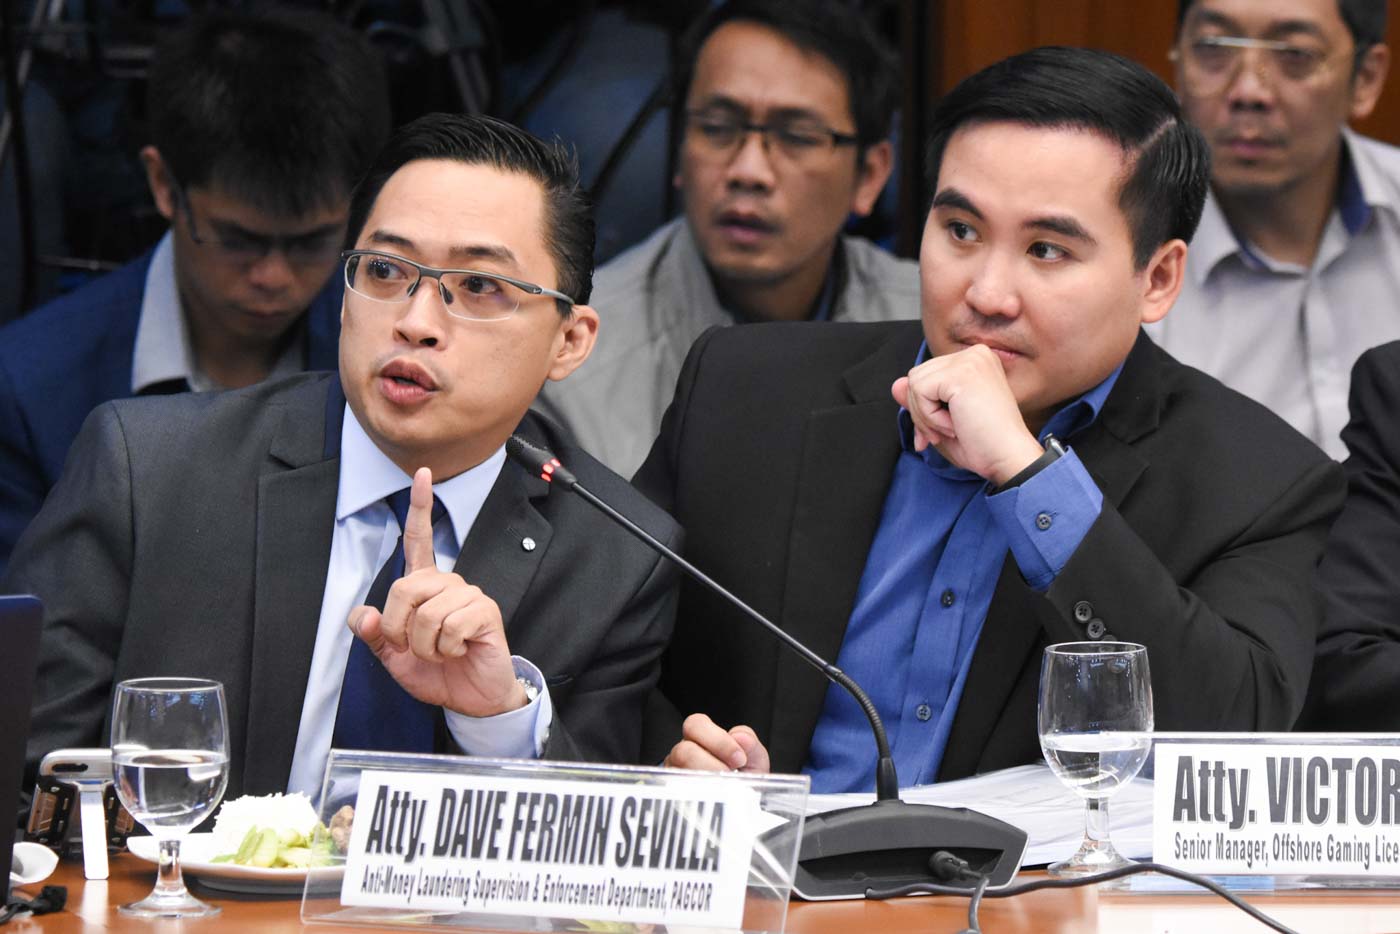 IN LOVE WITH POGO? Pagcor AVP Dave Sevilla (L) and POGO manager Victor Padilla (R) at the Senate hearing on the alleged money laundering linked to POGOs on March 5, 2020. Photo by Angie de Silva/Rappler 